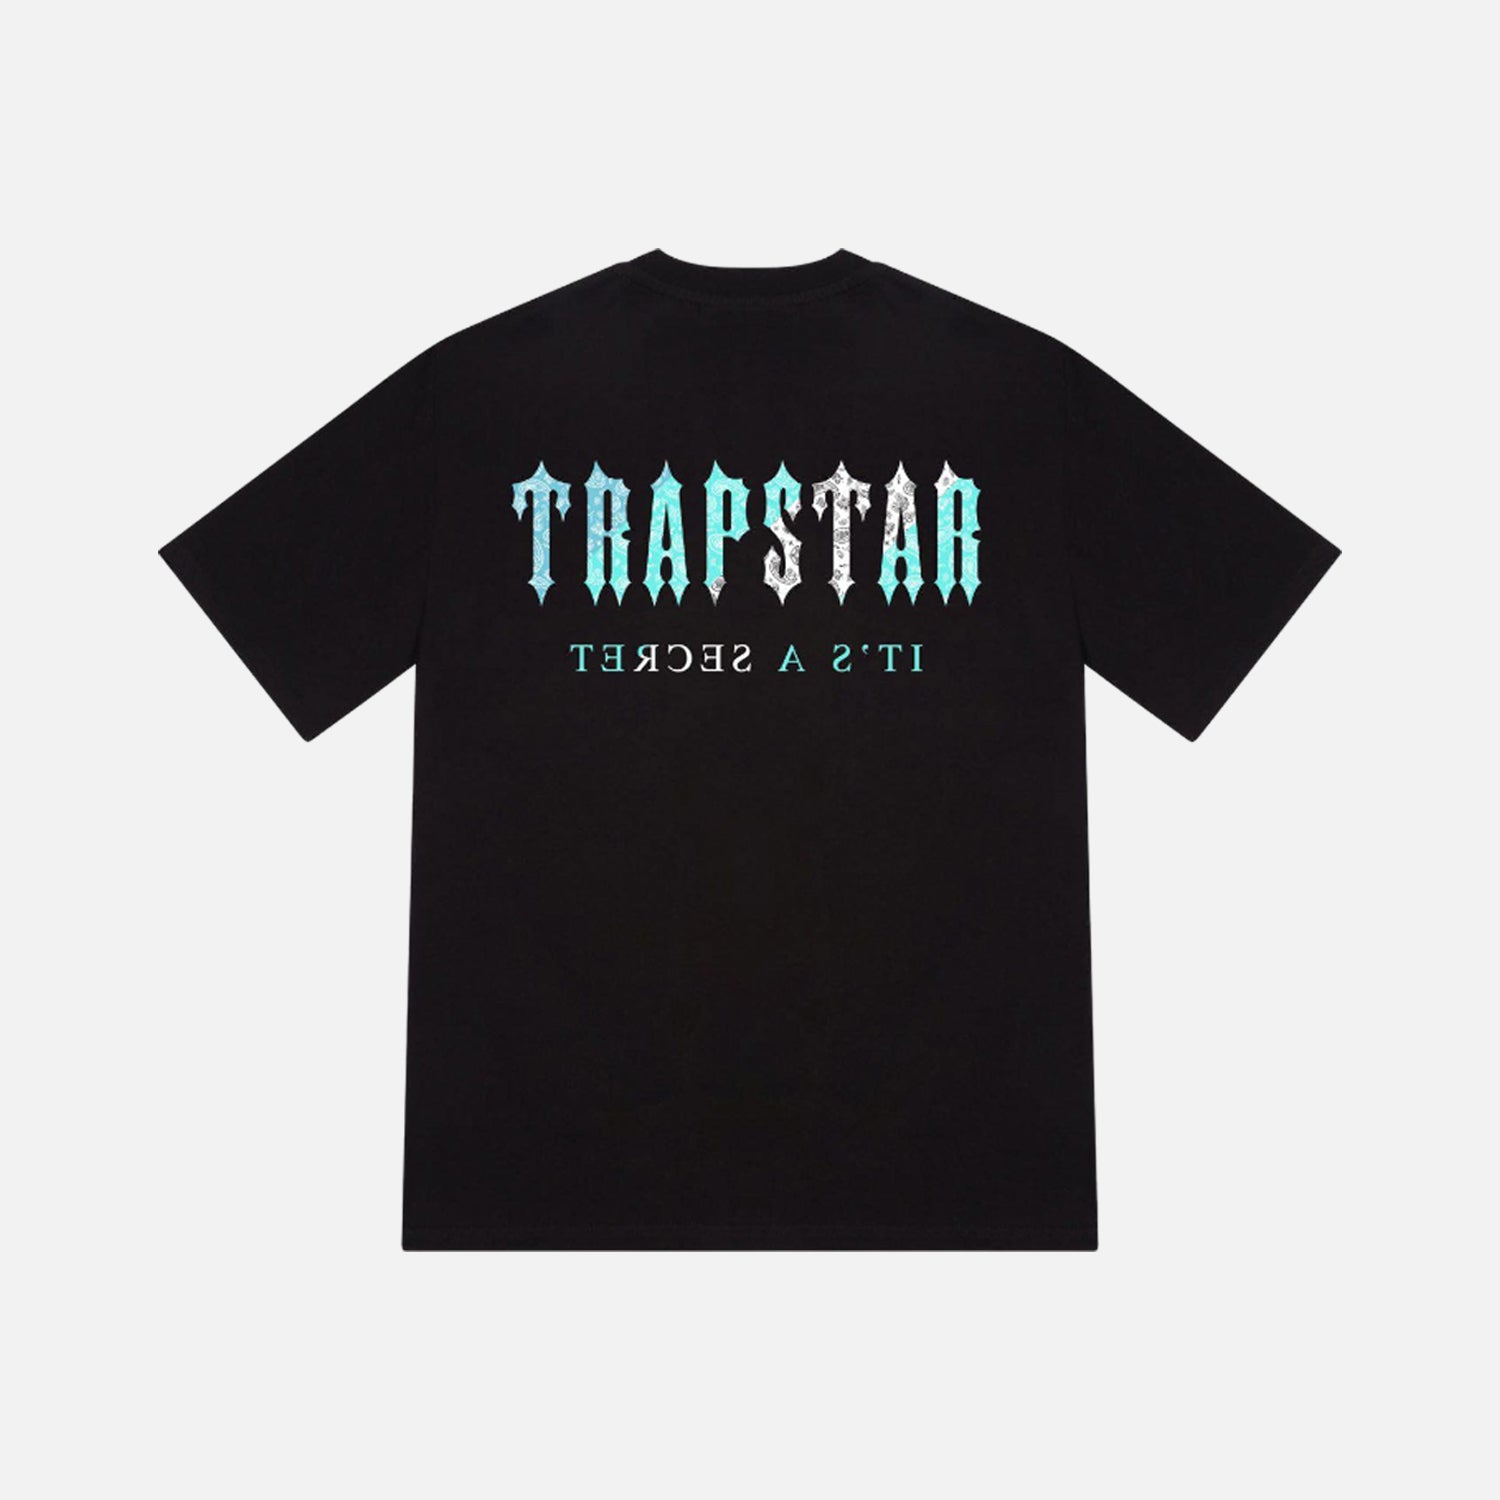 Trapstar Decoded Paisley T-Shirt - Black / Teal